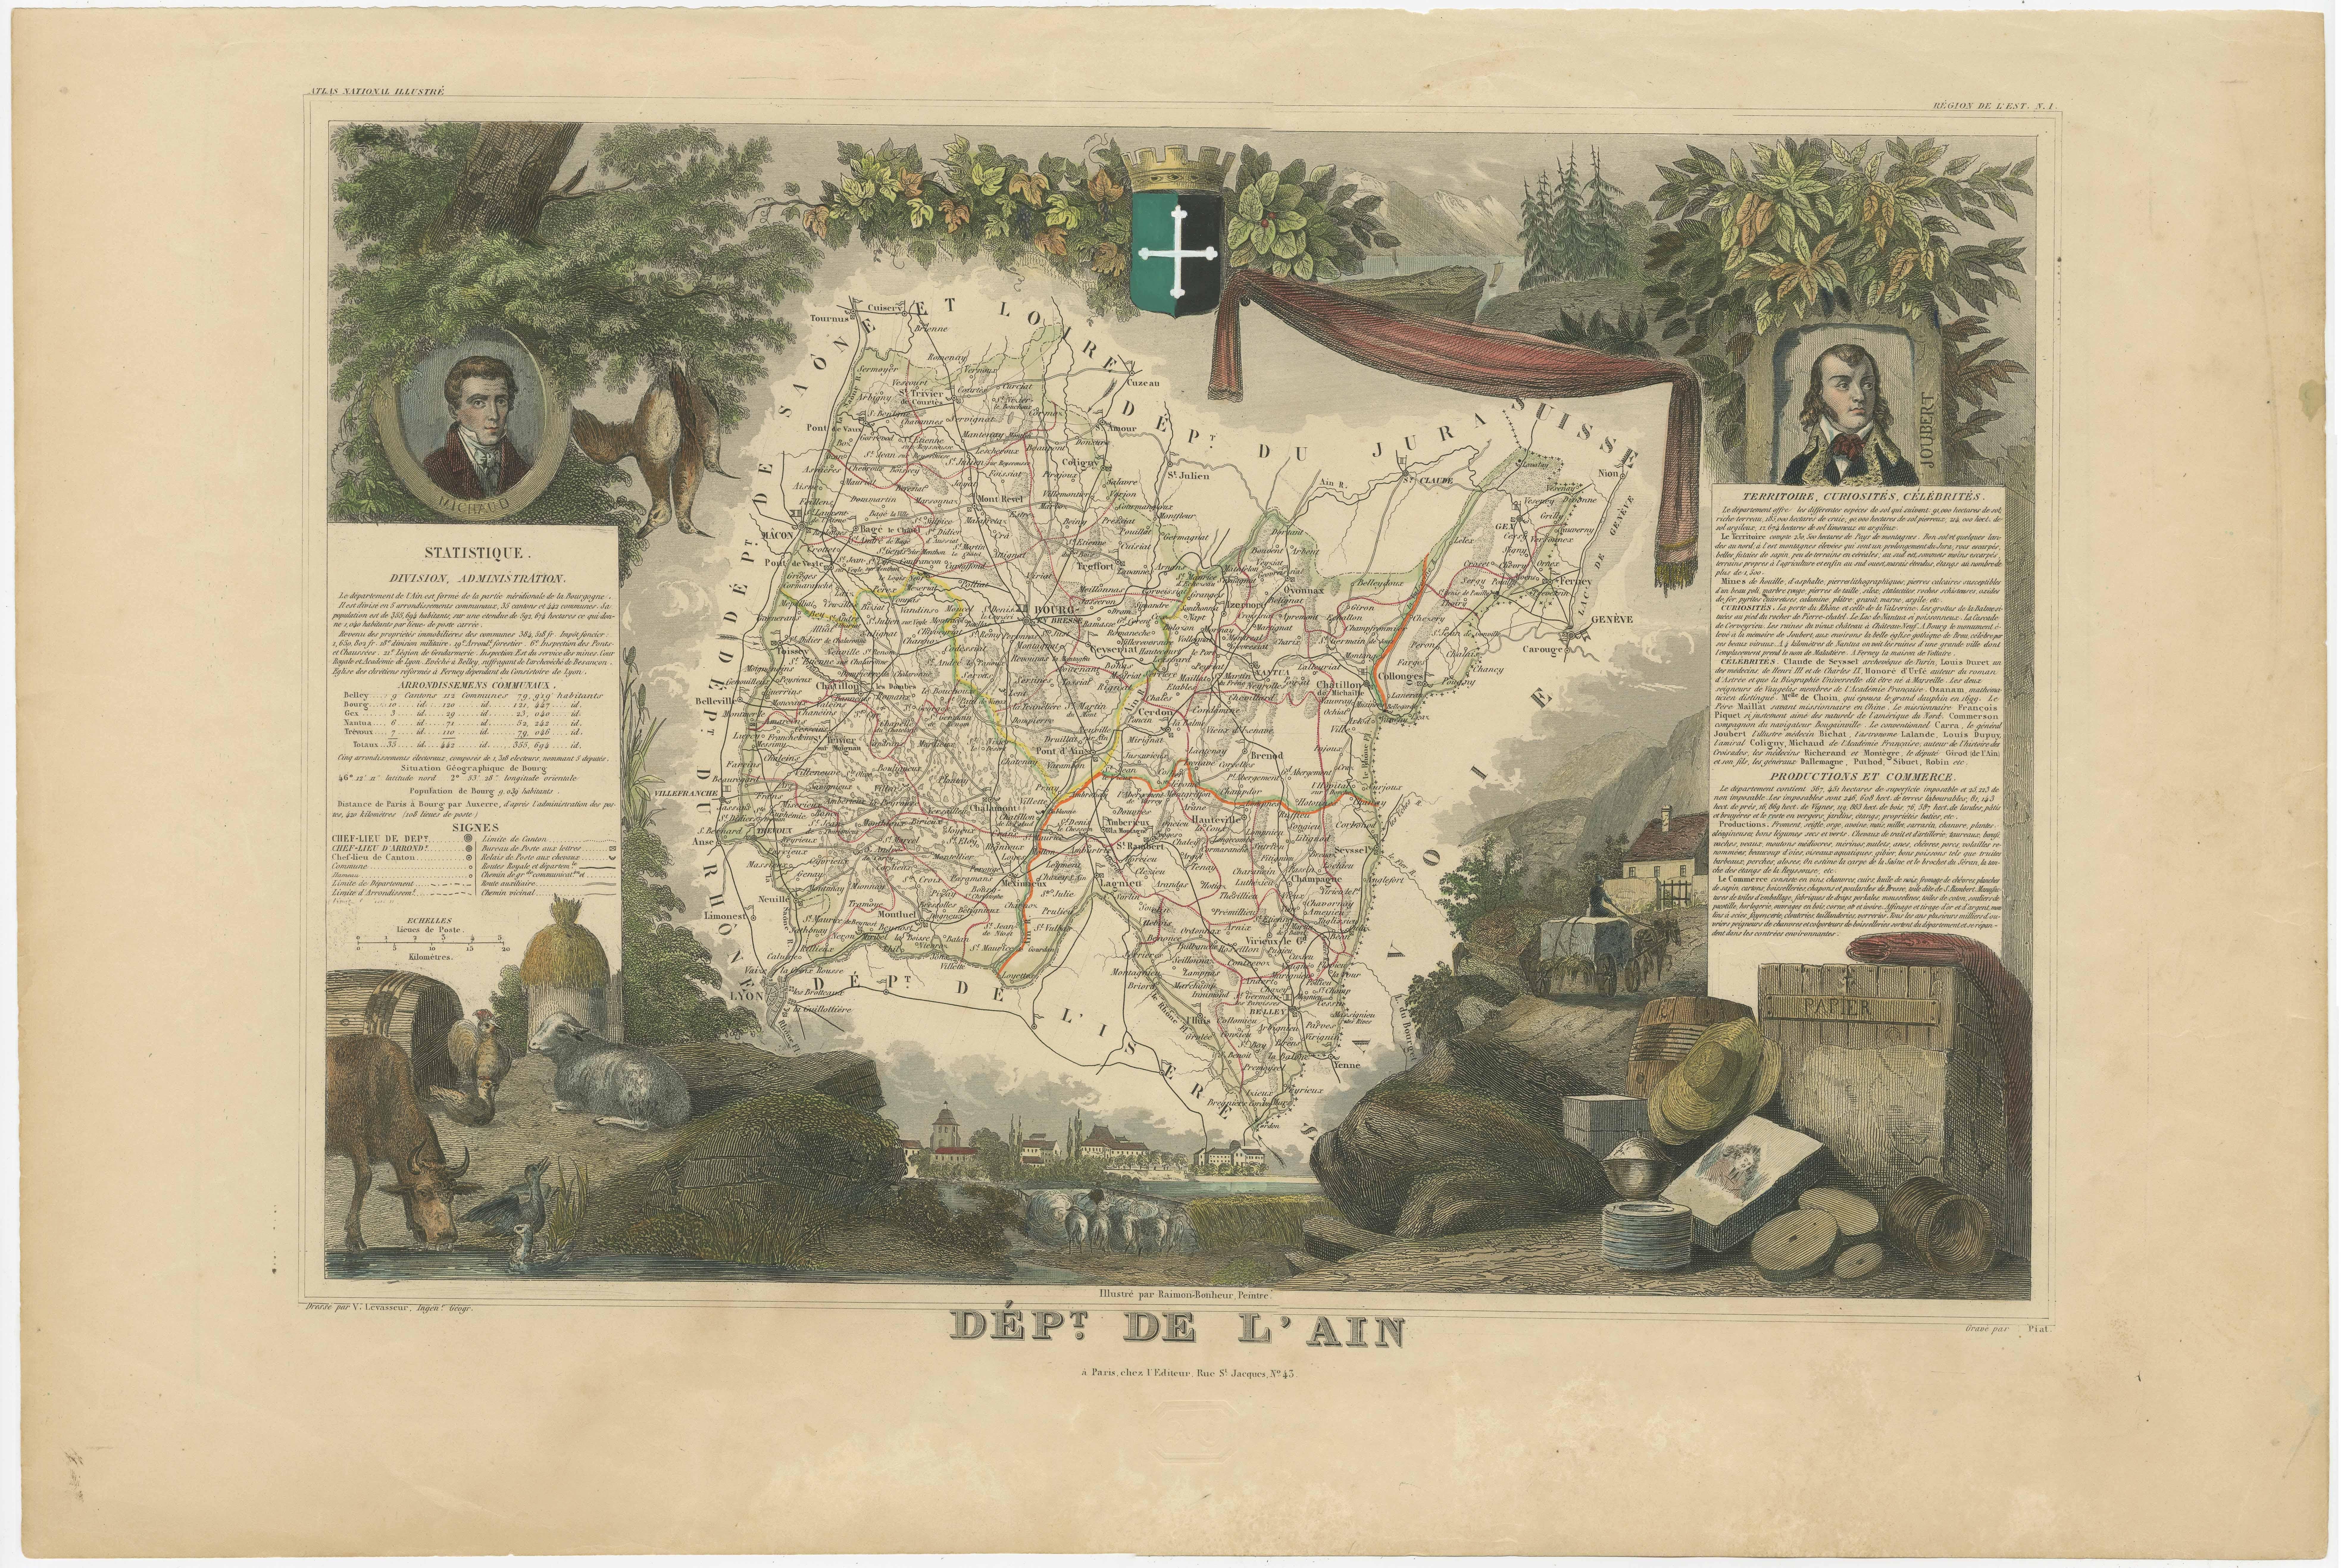 Antique map titled 'Dépt. de l'Ain'. Map of the French department of l'Ain, France. This area of France is known for its Bugey wines, which are generally aromatic and white. It is also known for its fine blue cheese, poultry, and fisheries. The